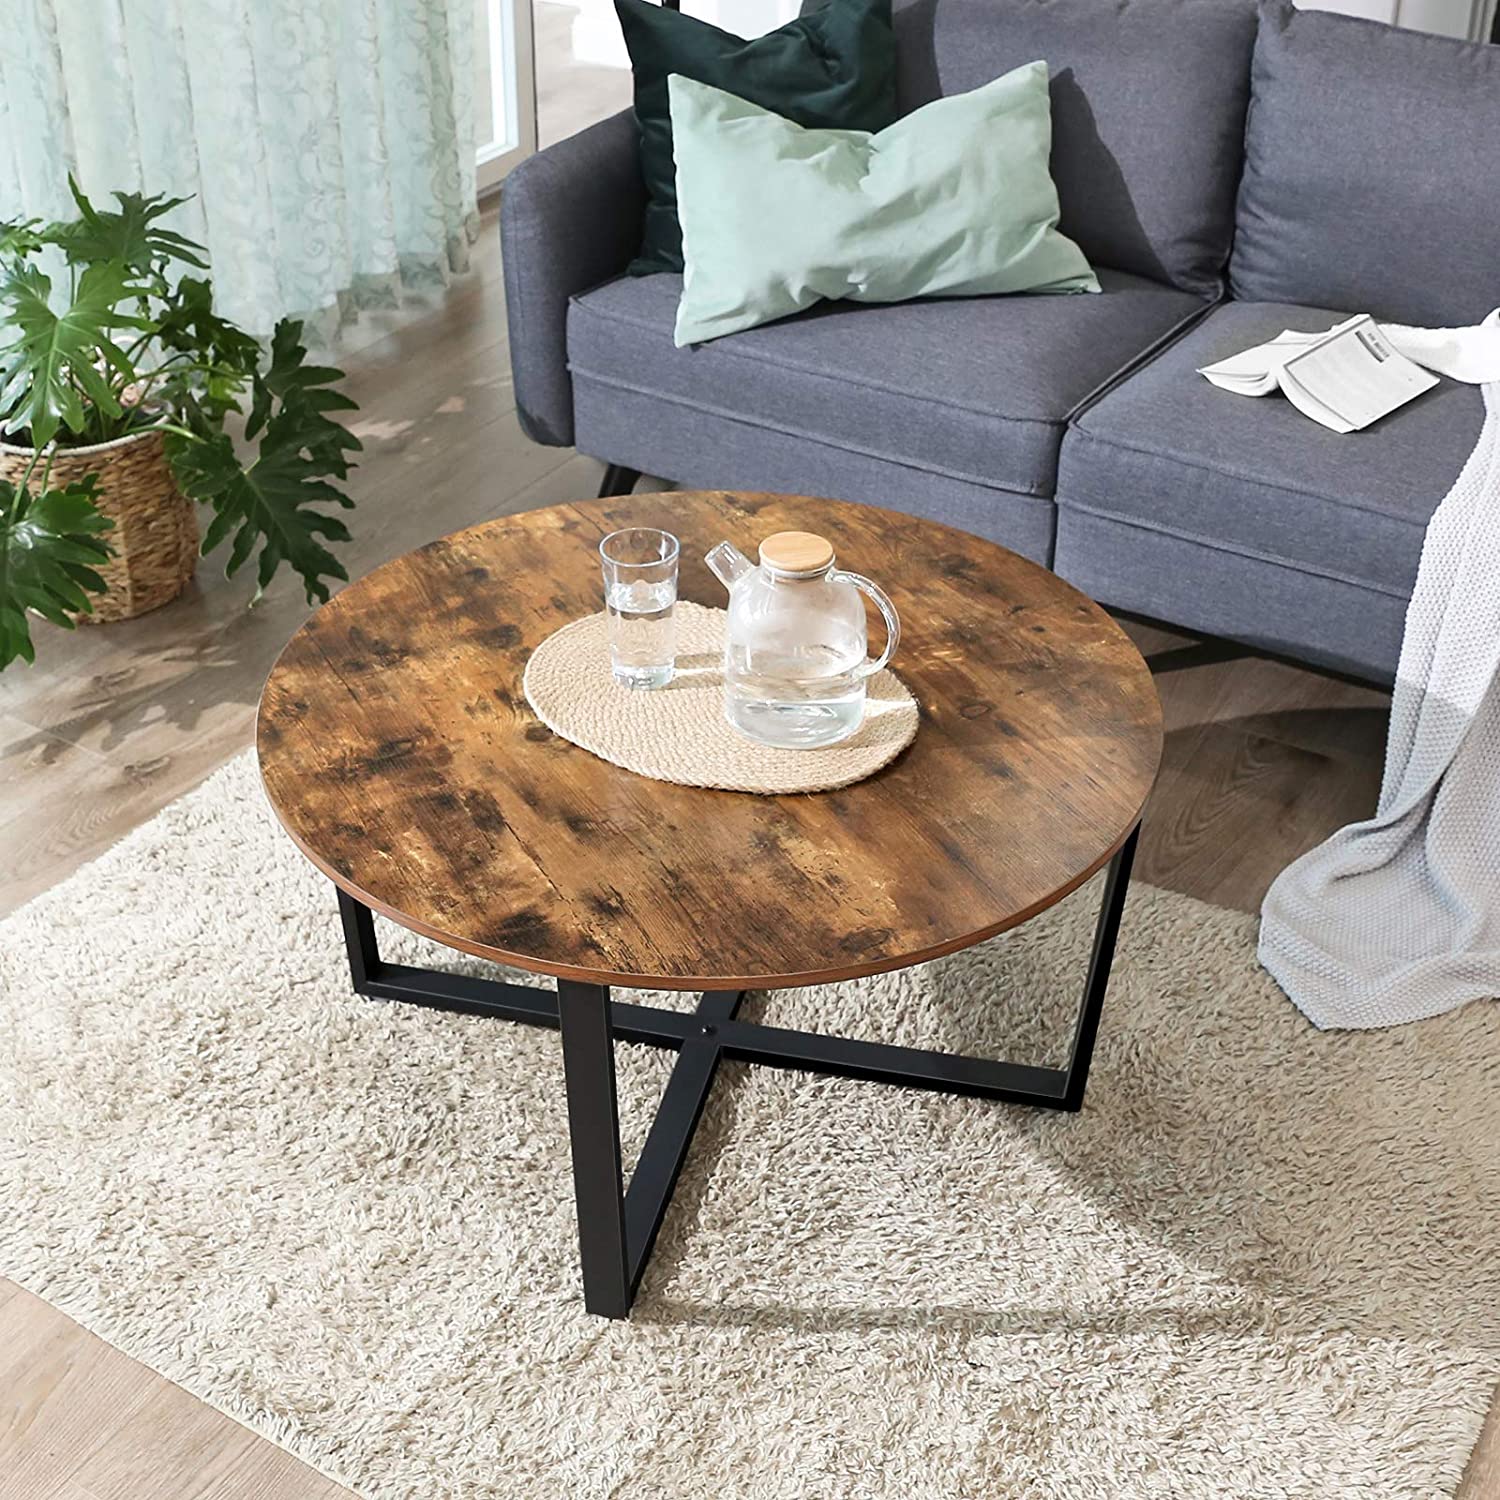 Rena Round Coffee Table Rustic Vintage Style